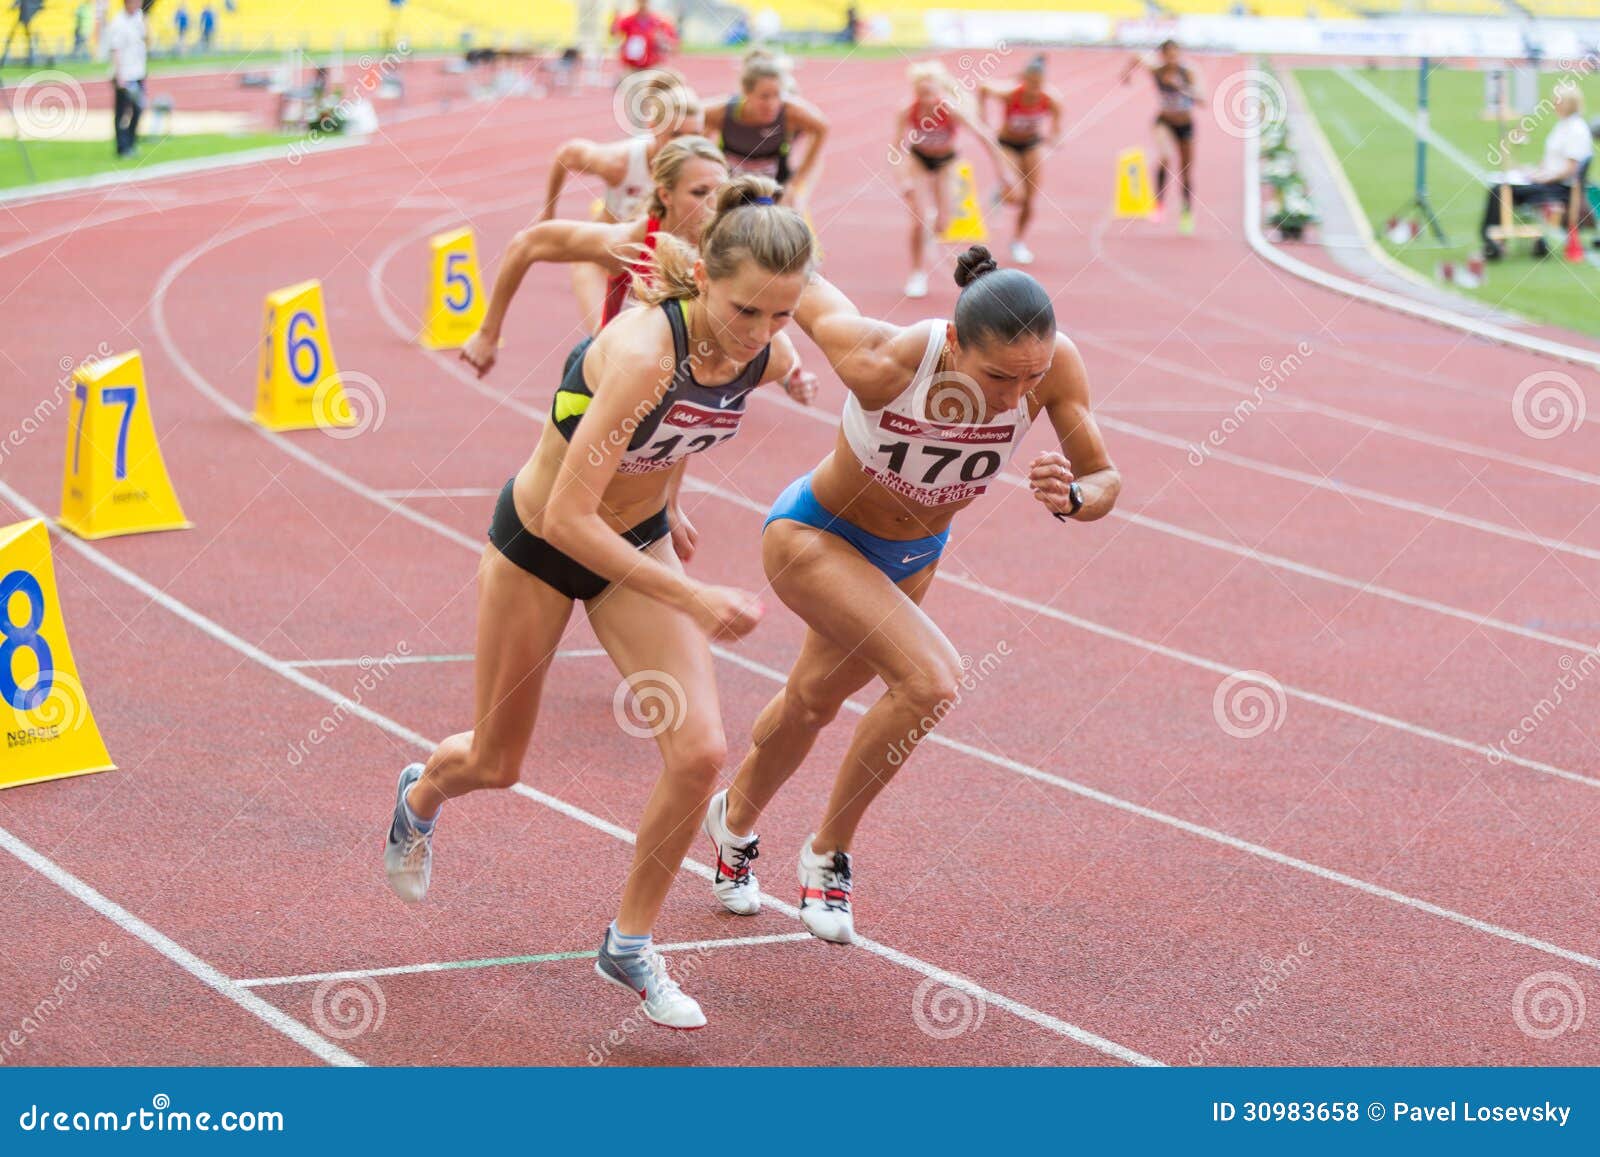 sart-race-international-athletic-competition-moscow-jun-moscow-challenge-june-luzhniki-moscow-russia-30983658.jpg